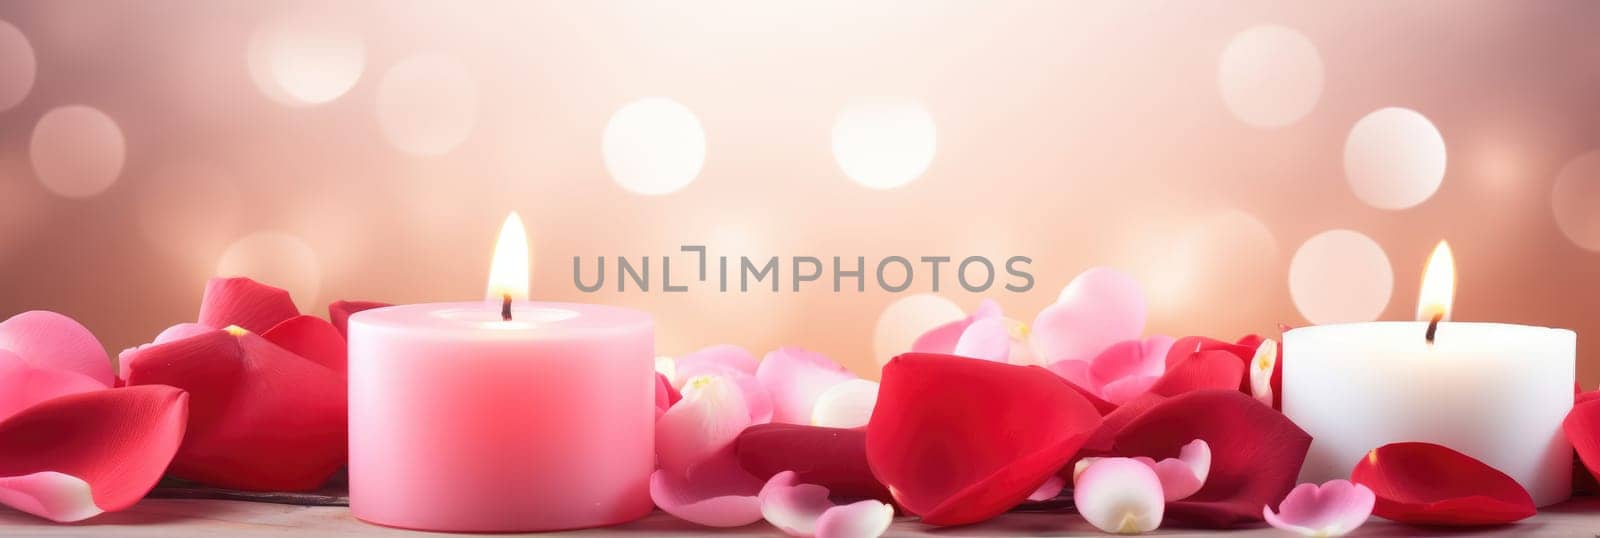 St. Valentines day, wedding banner with abstract illustrated red, pink rose petals, candles on pink background. Use for cute love sale banner, print, greeting card. Concept love, copy space